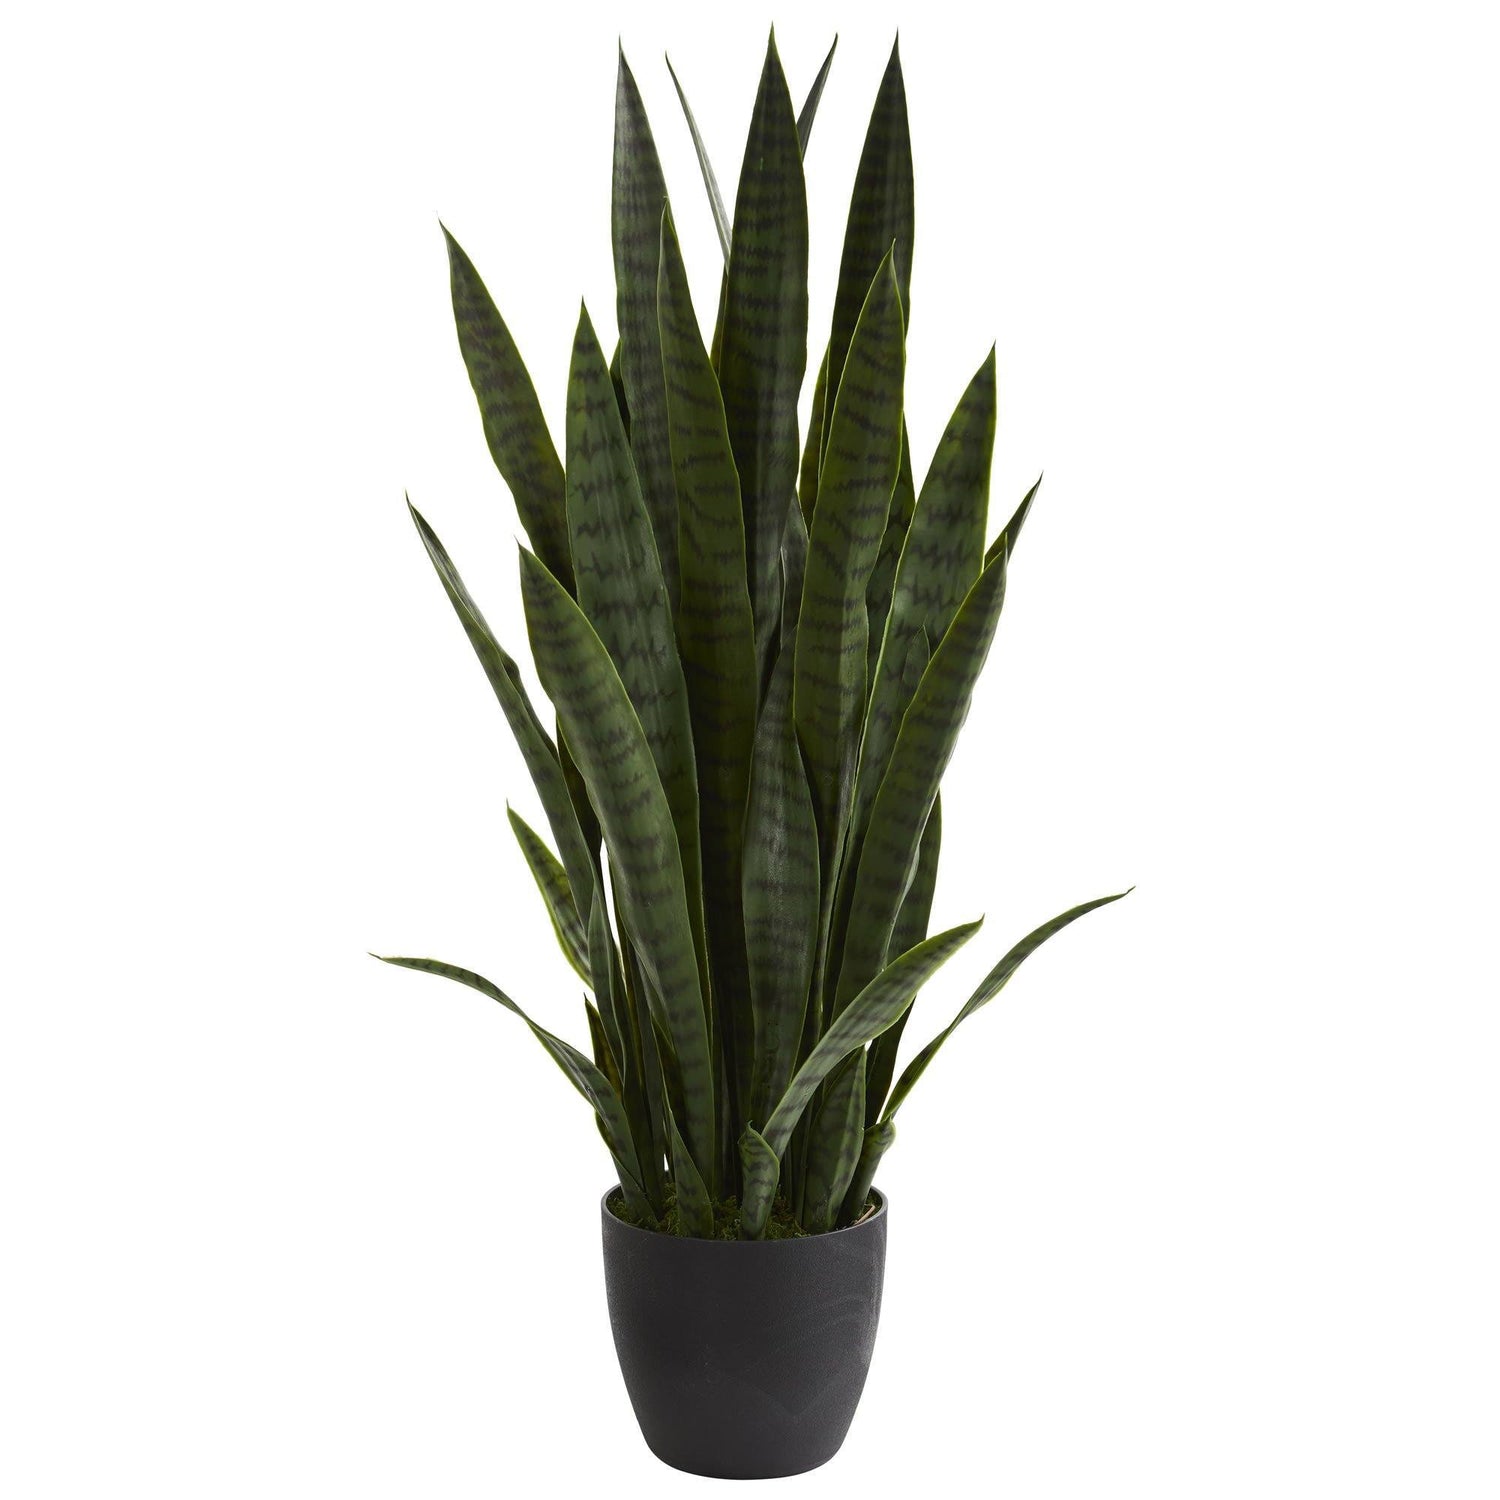  DUZYXI Artificial Snake Plants 16 with White Ceramic Pot  Sansevieria Plant Fake Snake Plant Greenery Faux Plant in Pot for Home  Office Living Room Housewarming Gifts Indoor Outdoor Decor-Green : Home